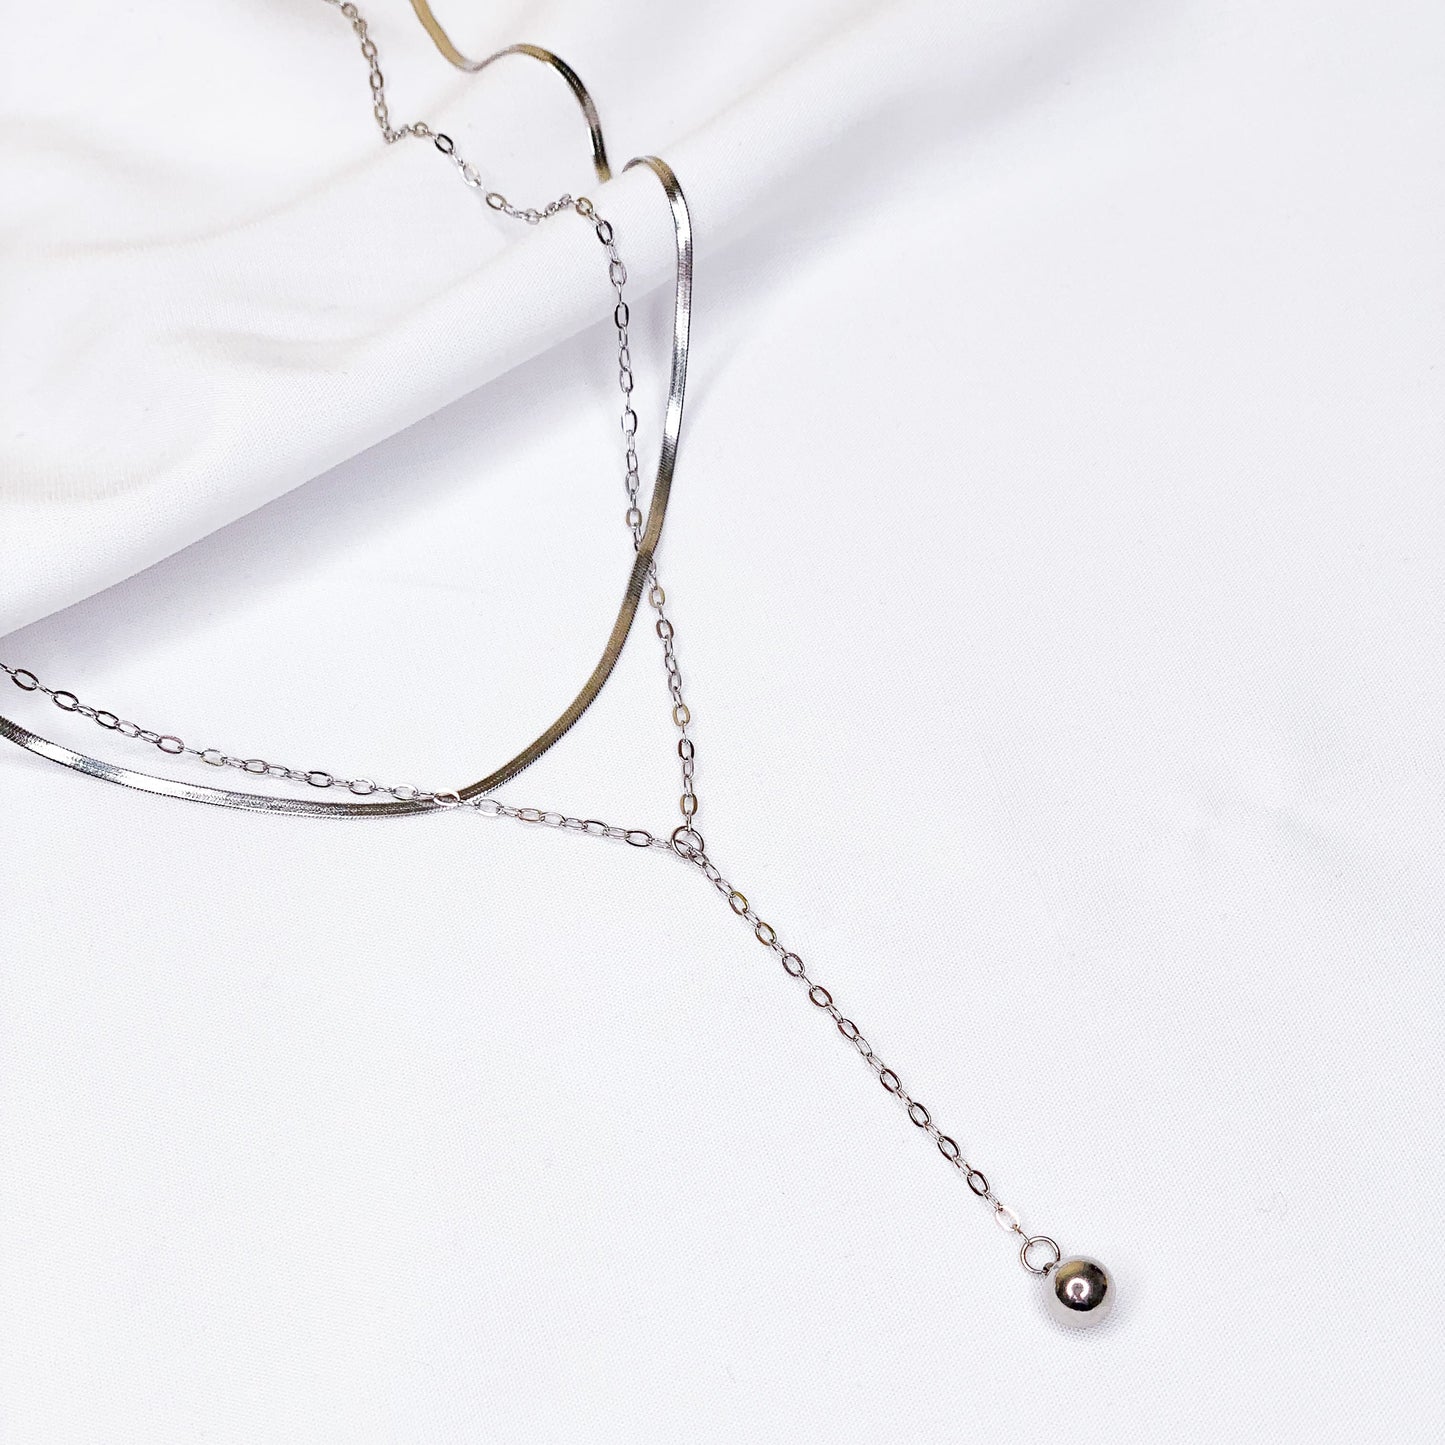 Chain ball pendant necklace